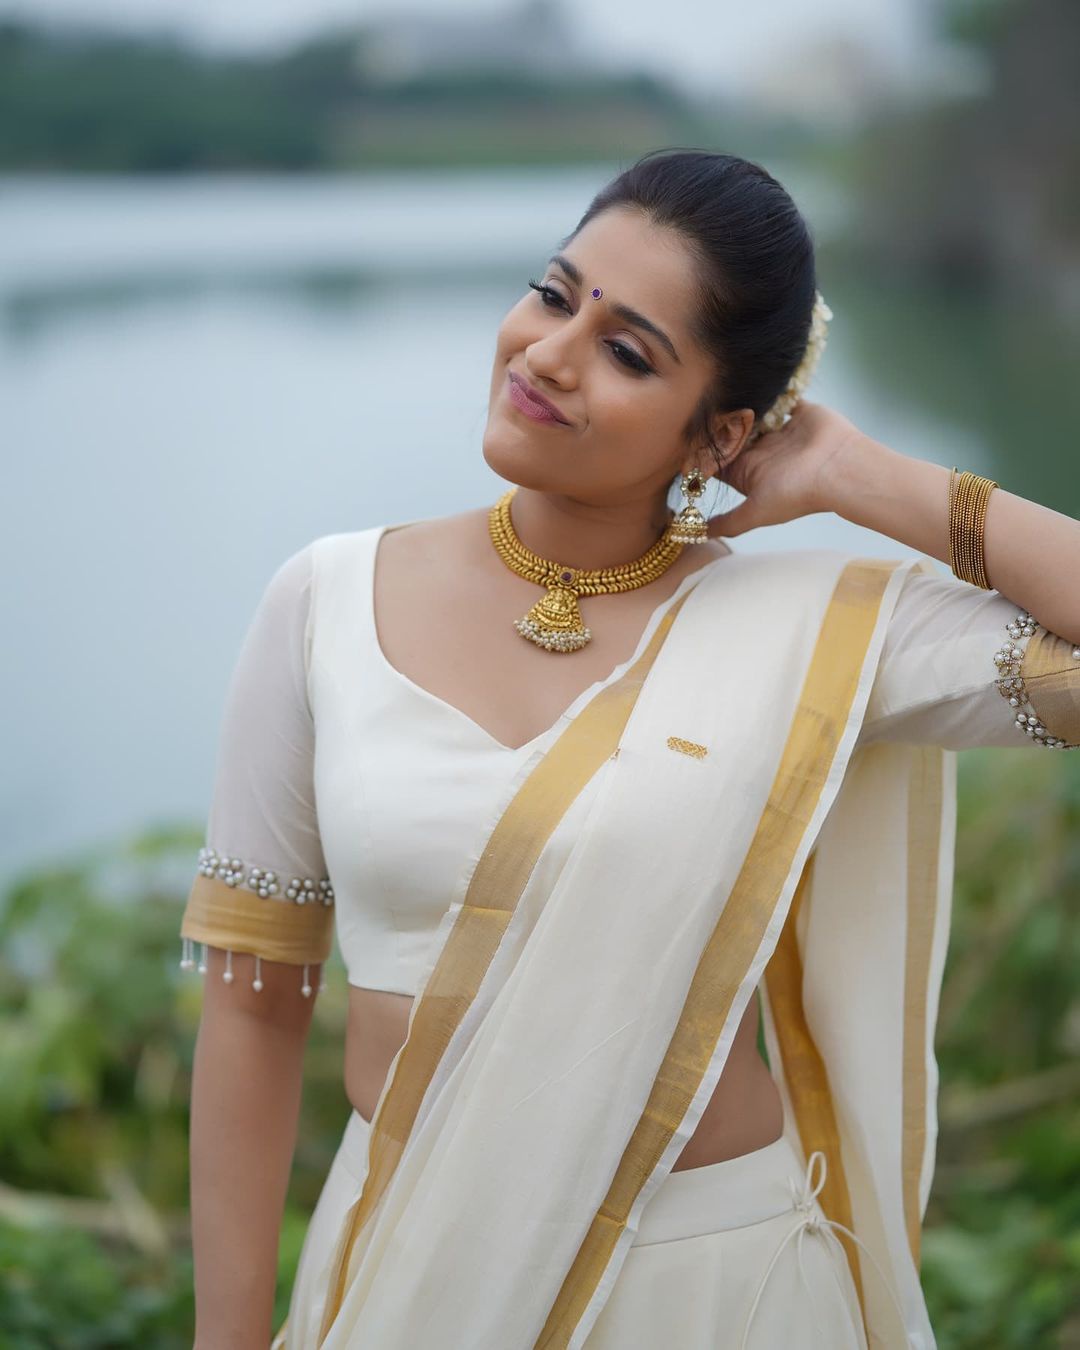 Rashmi Gautham sets hearts on fire with her beautiful pictures